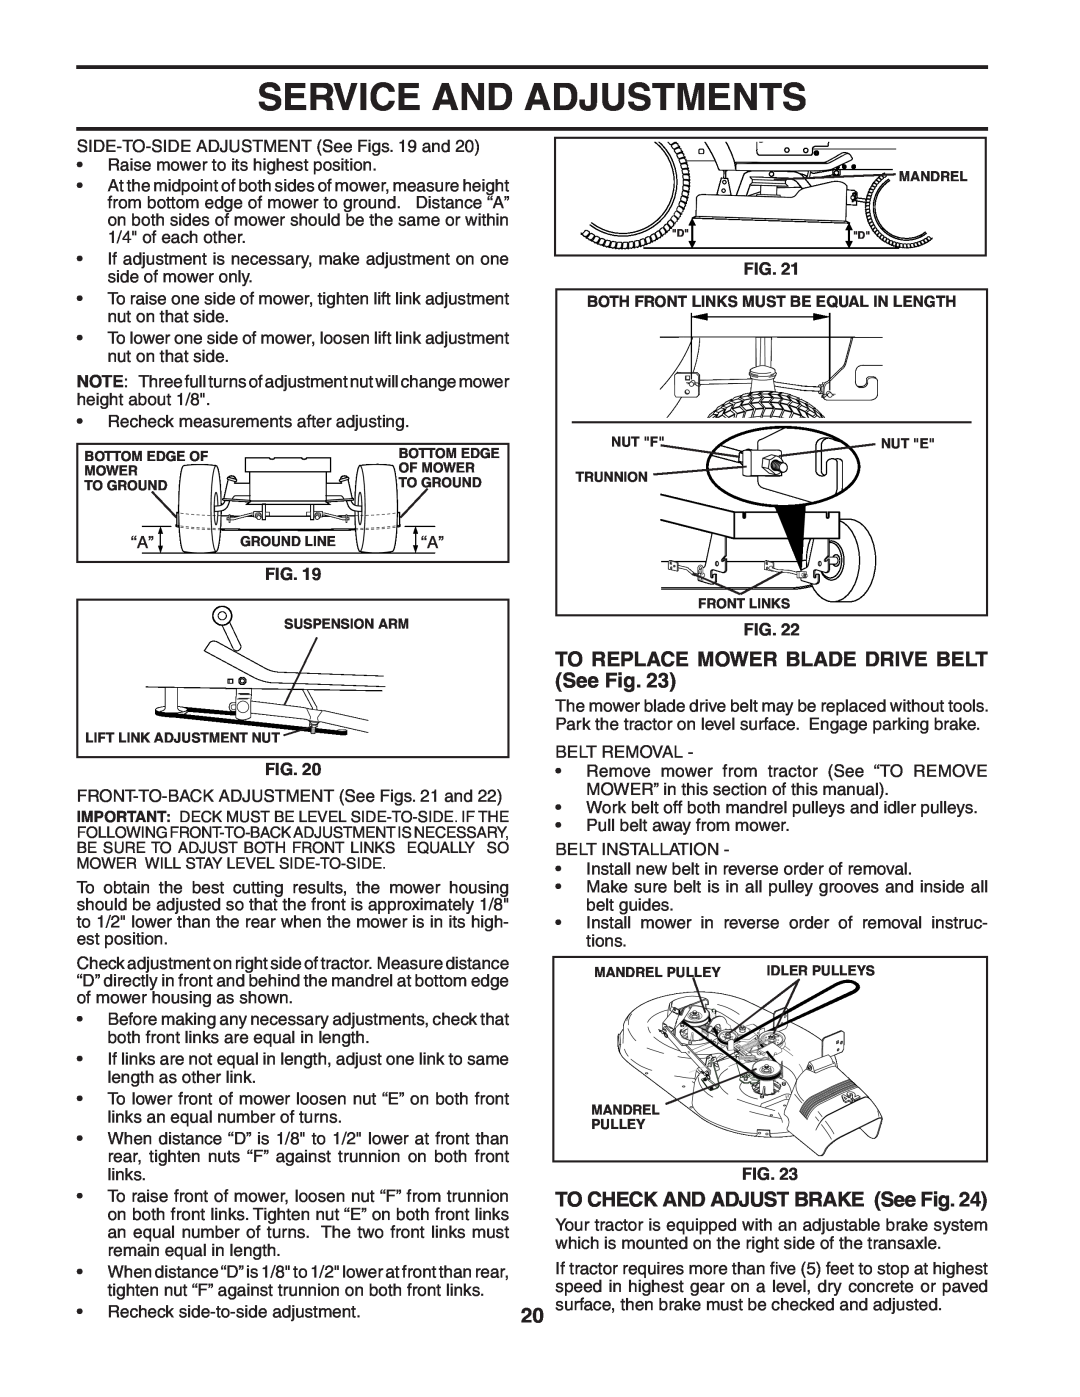 Poulan 190944 TO REPLACE MOWER BLADE DRIVE BELT See Fig, TO CHECK AND ADJUST BRAKE See Fig, Service And Adjustments 